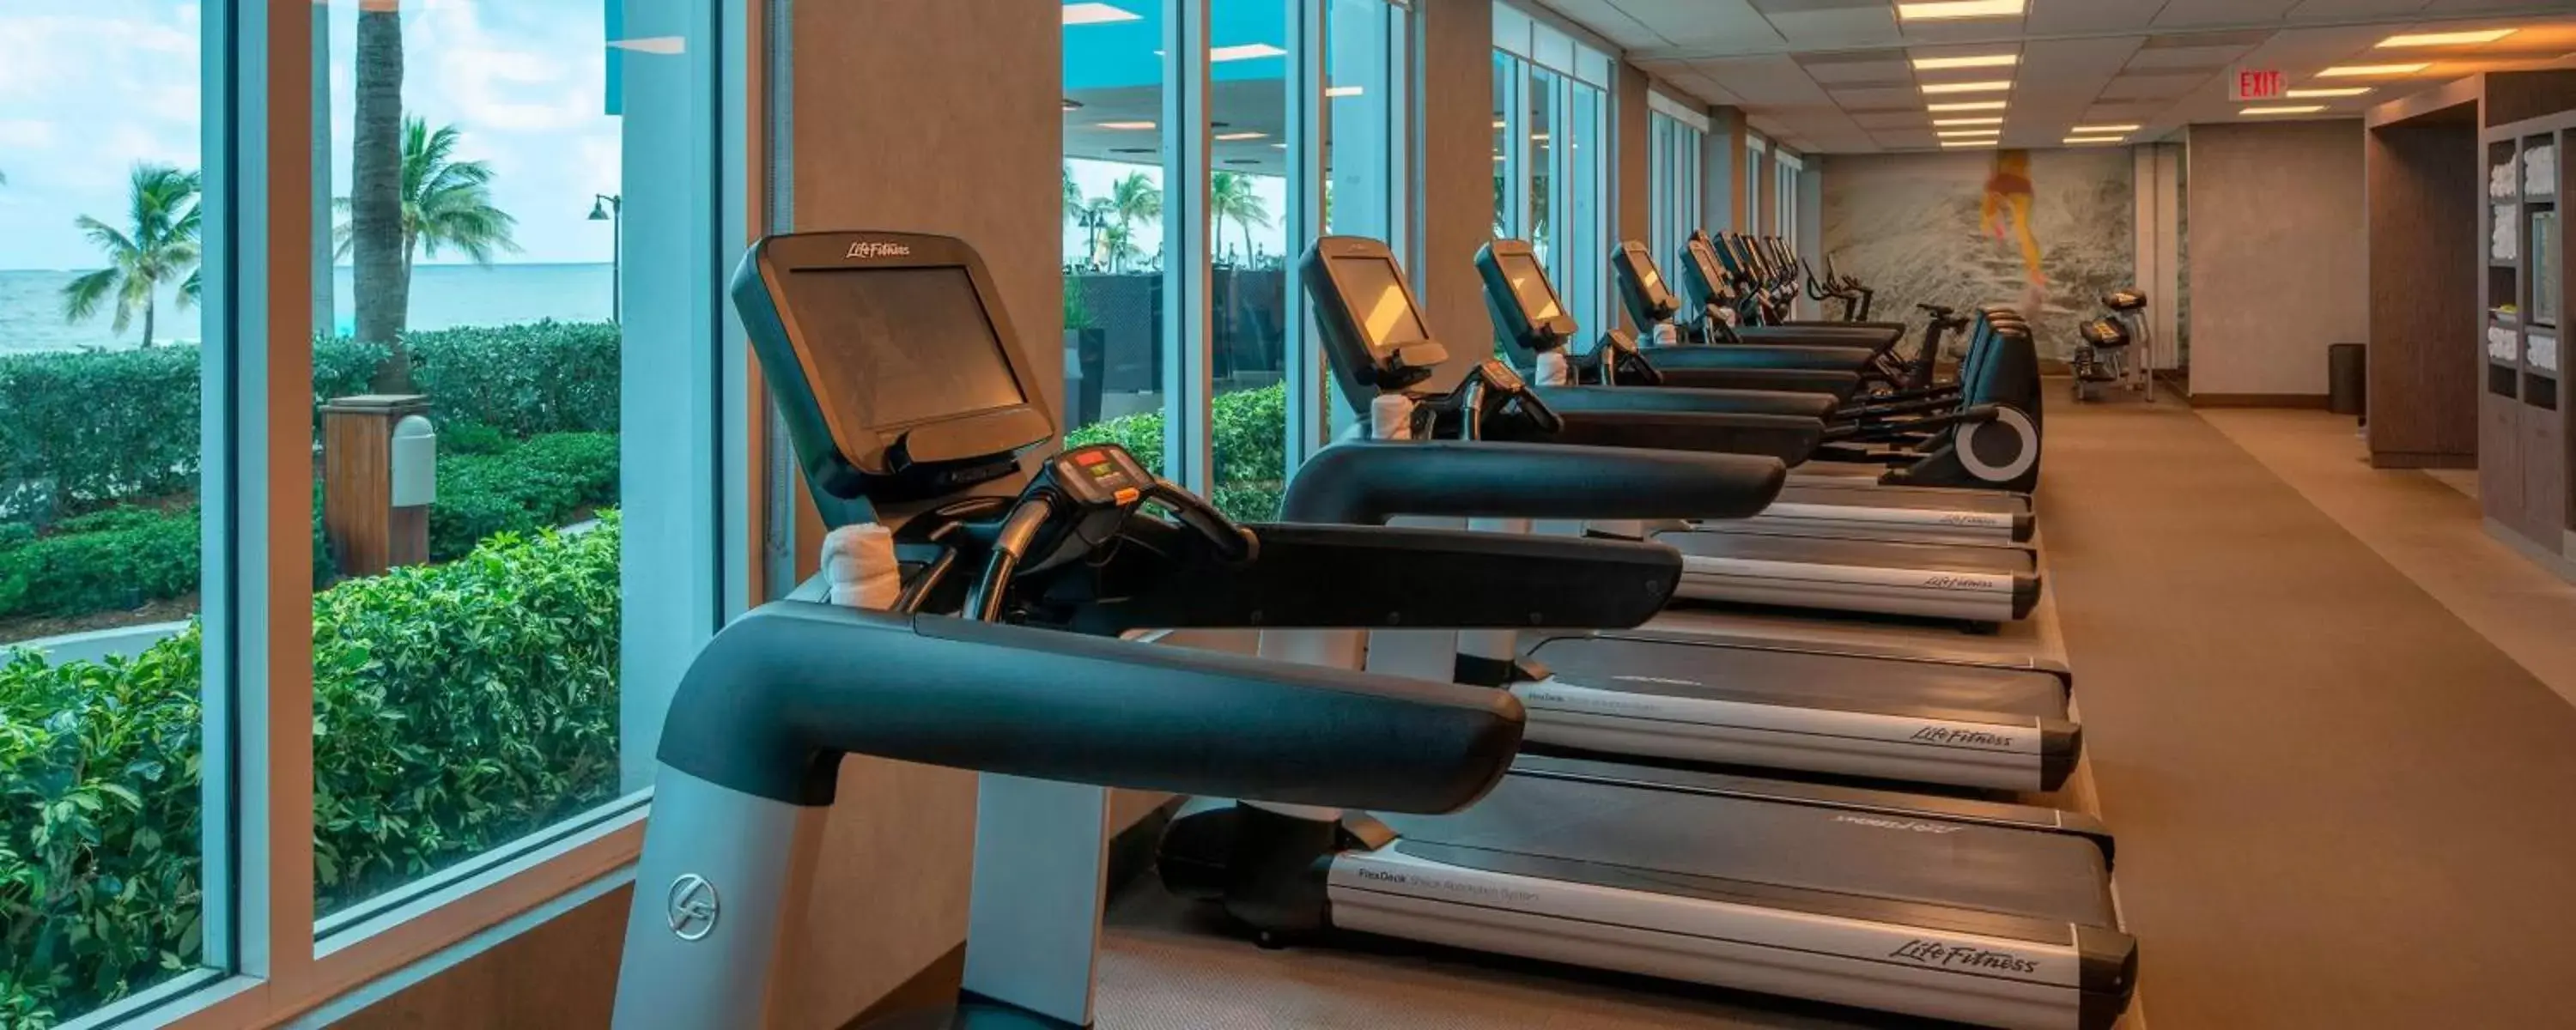 Fitness centre/facilities, Fitness Center/Facilities in The Westin Fort Lauderdale Beach Resort